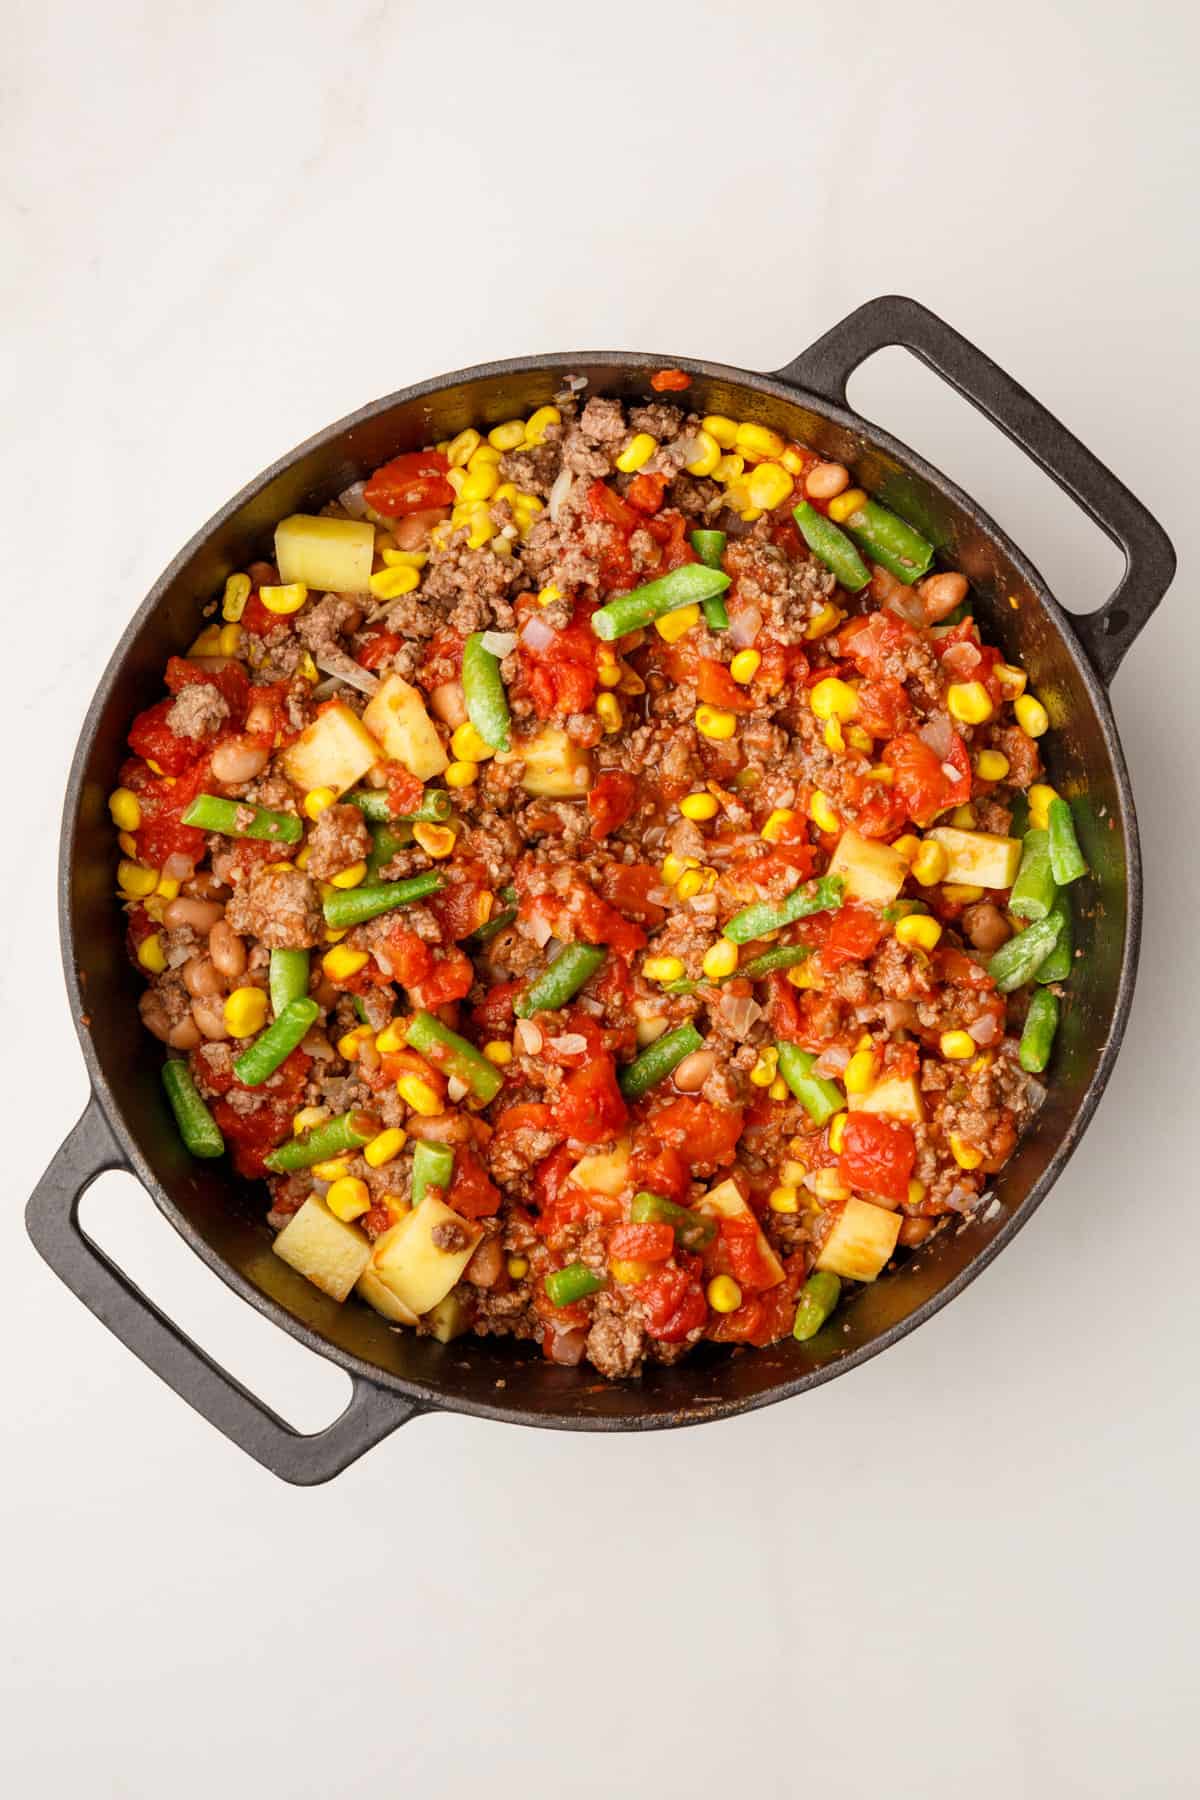 mixed vegetables and cooked ground beef in a large cast iron skillet